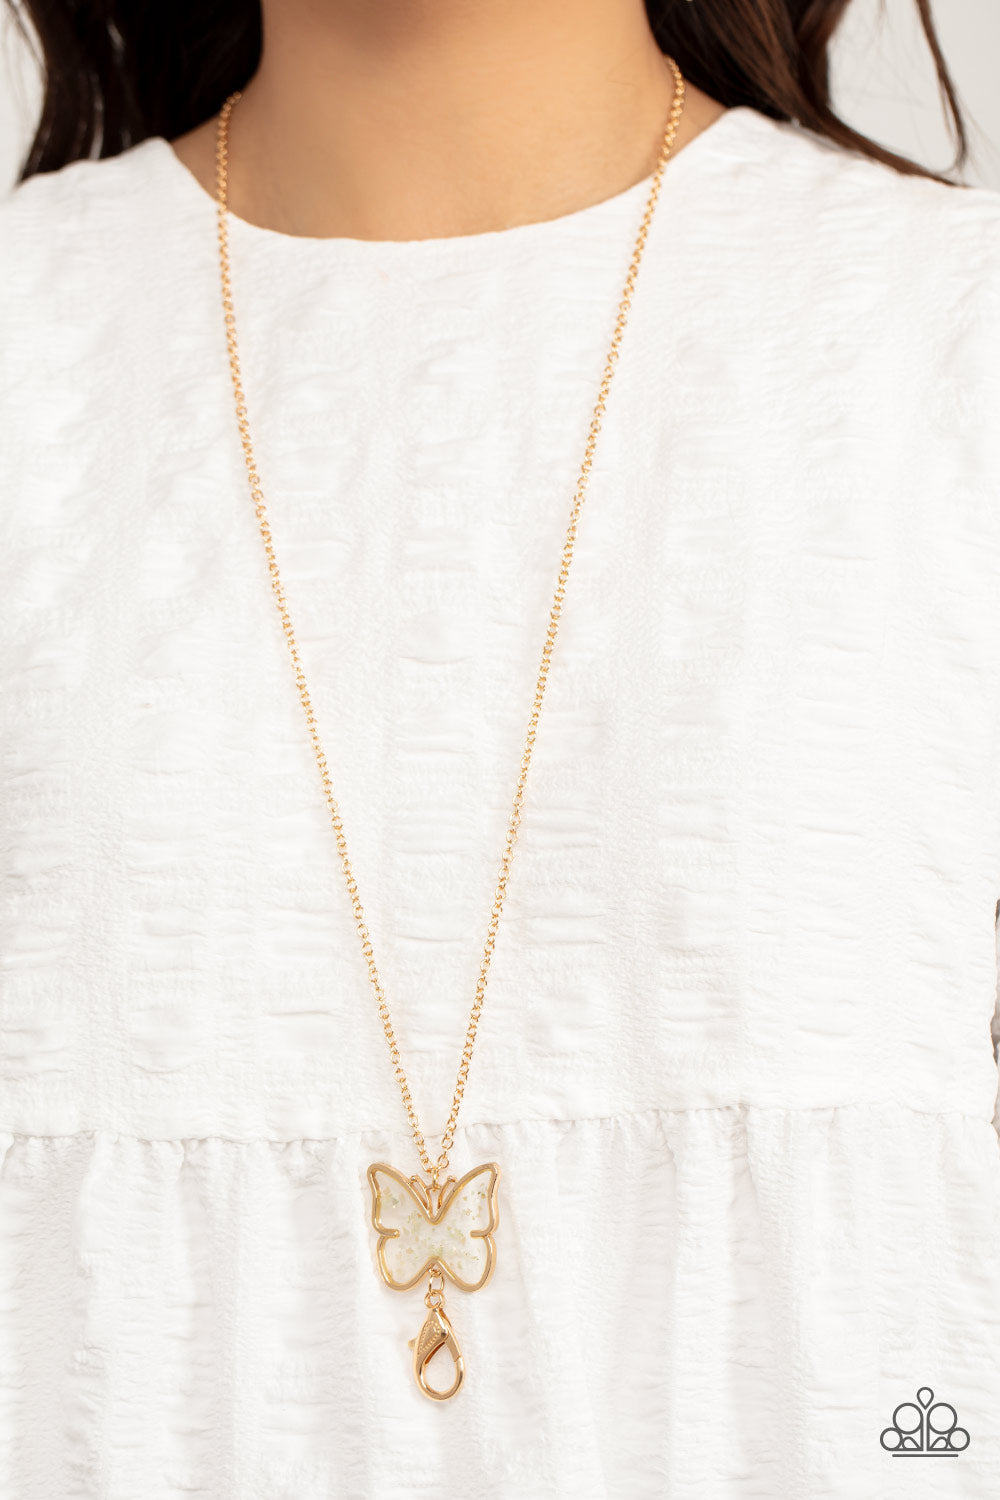 Gives Me Butterflies - Gold Butterfly Frame/Dainty Flecks of Shell Paparazzi Pendant LANYARD Necklace & matching earrings